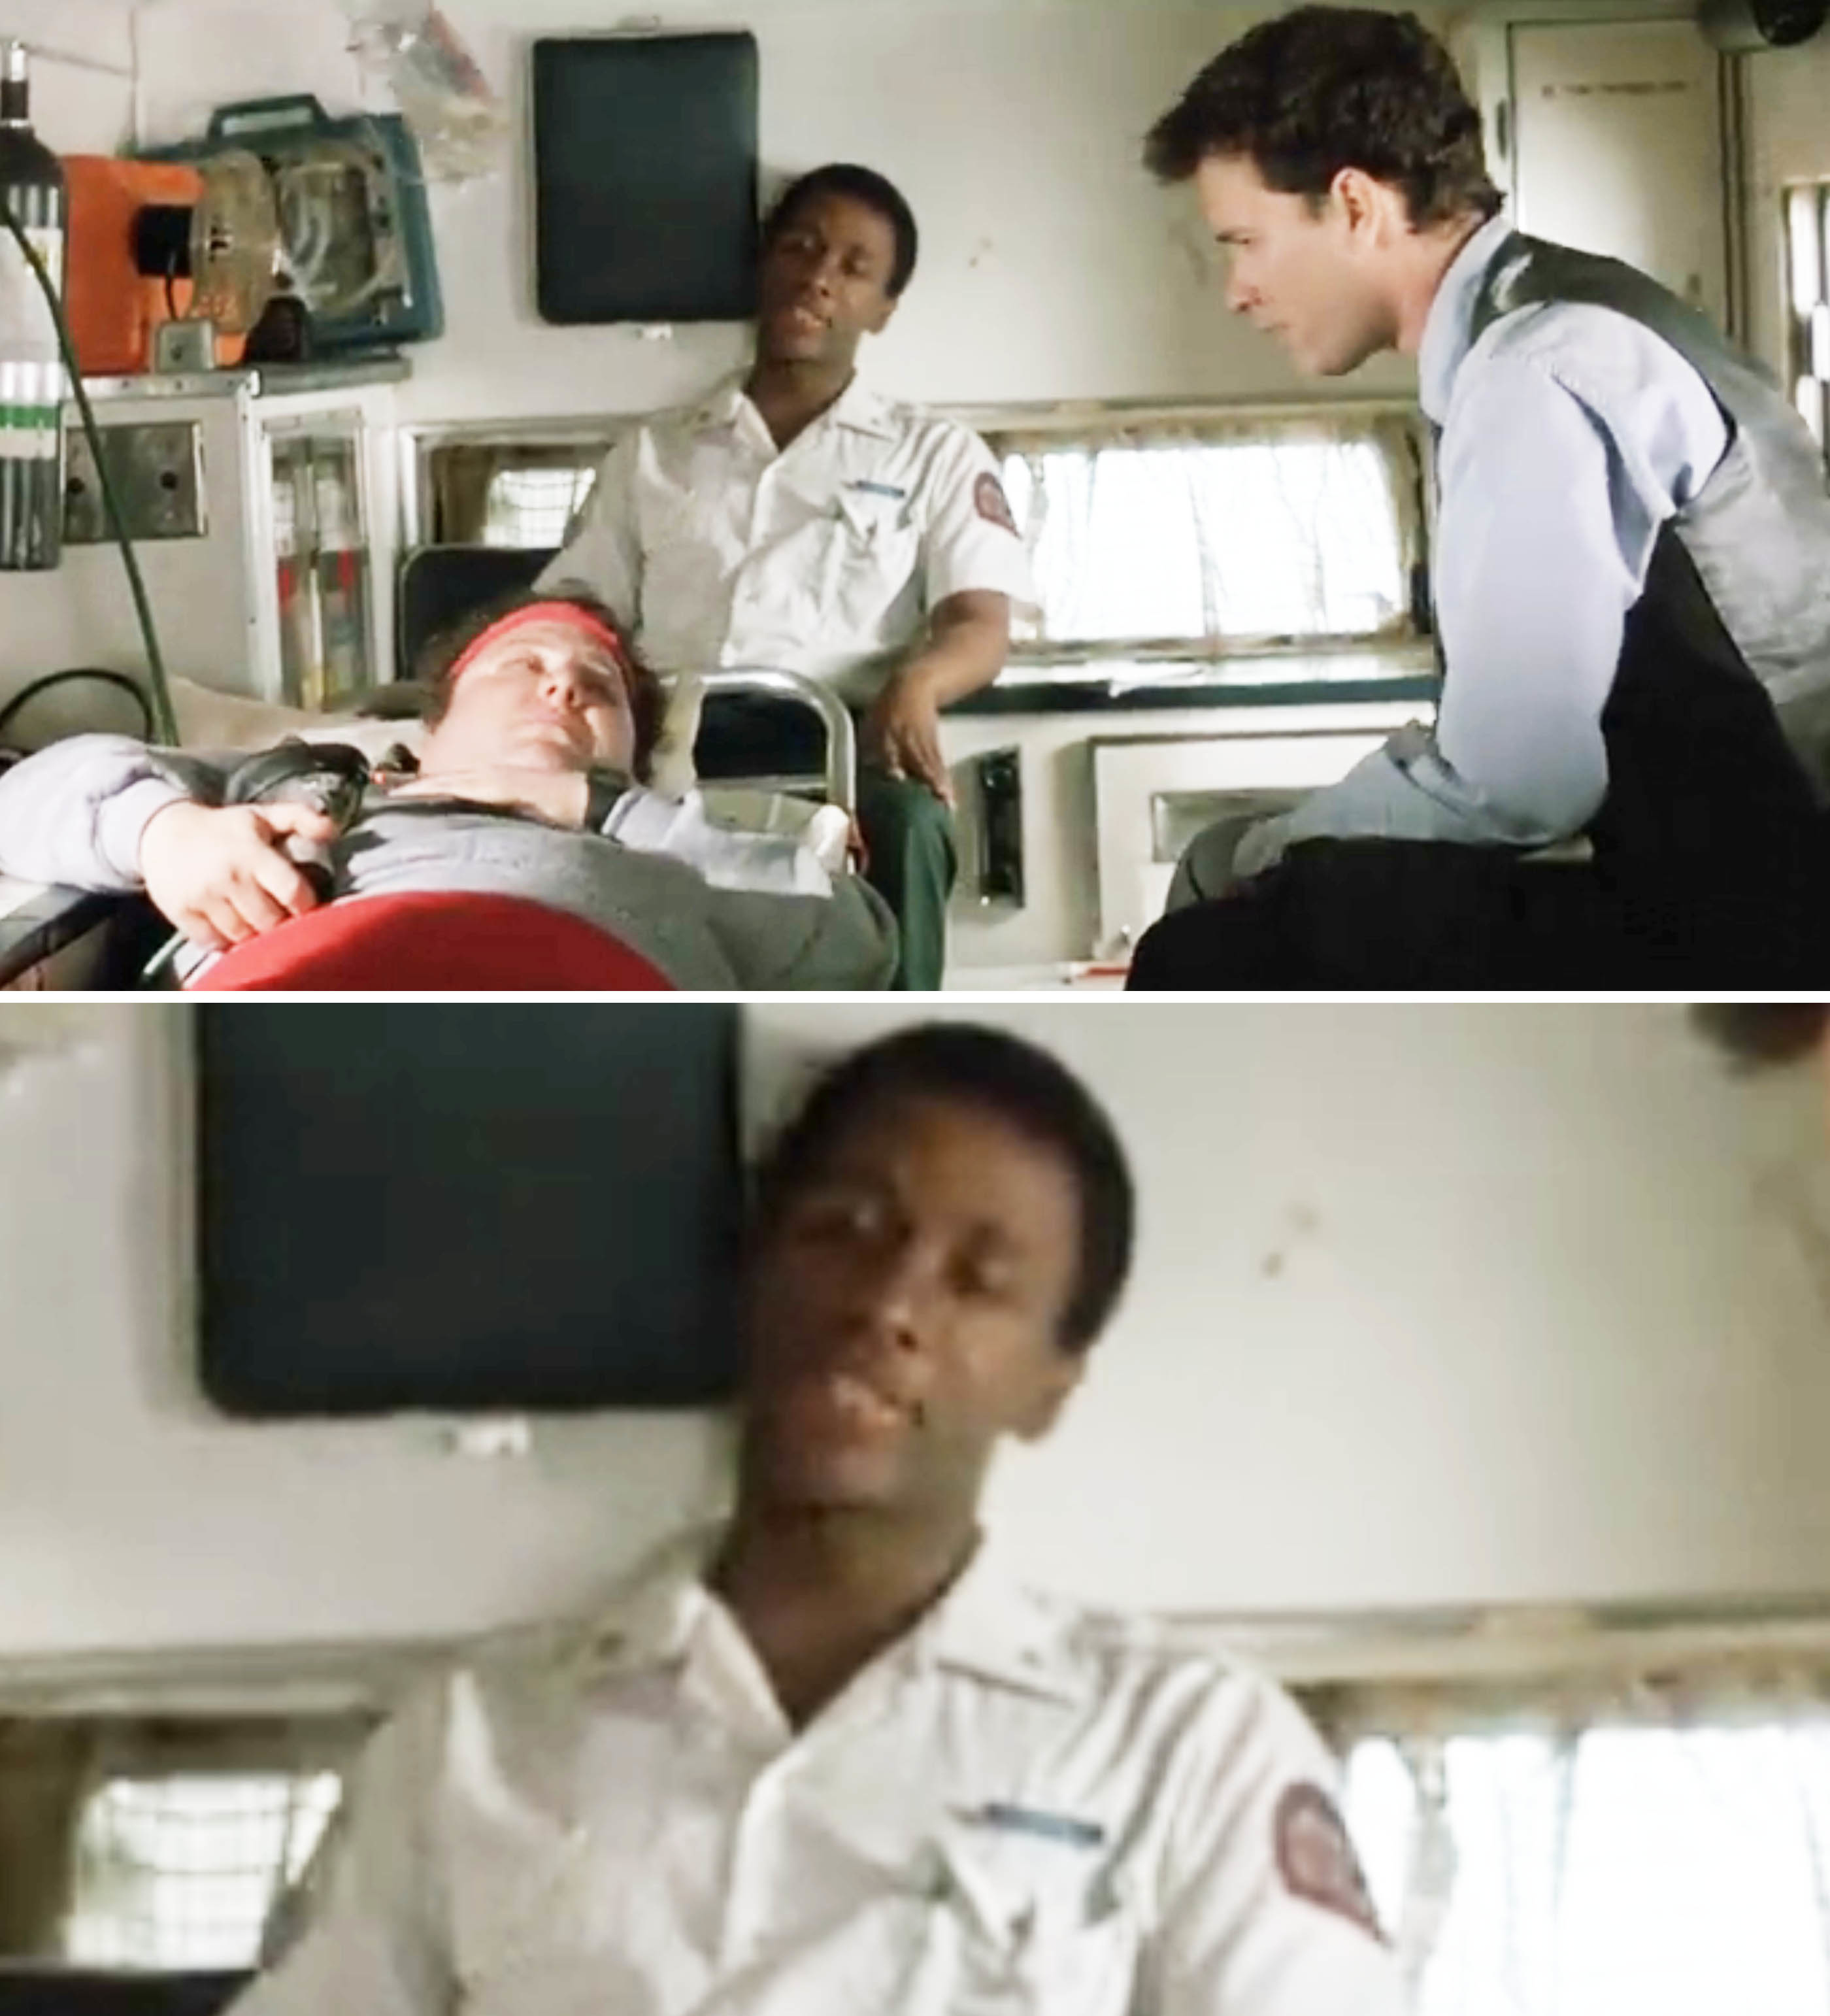 his character as an emt